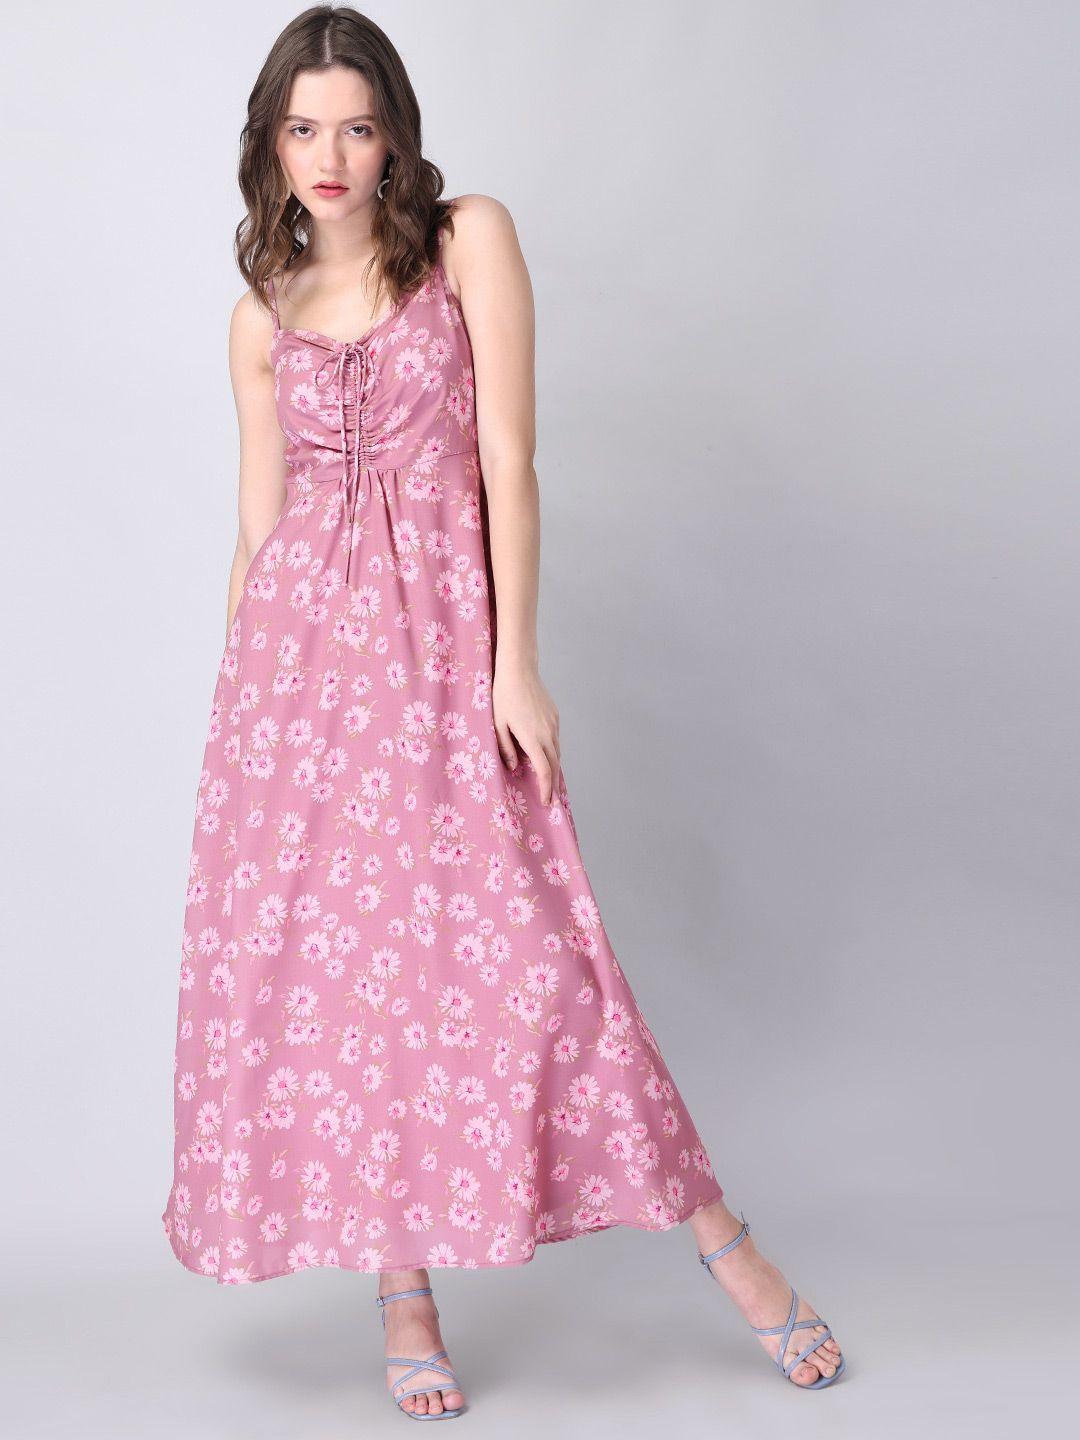 faballey floral printed smocked crepe casual maxi dress